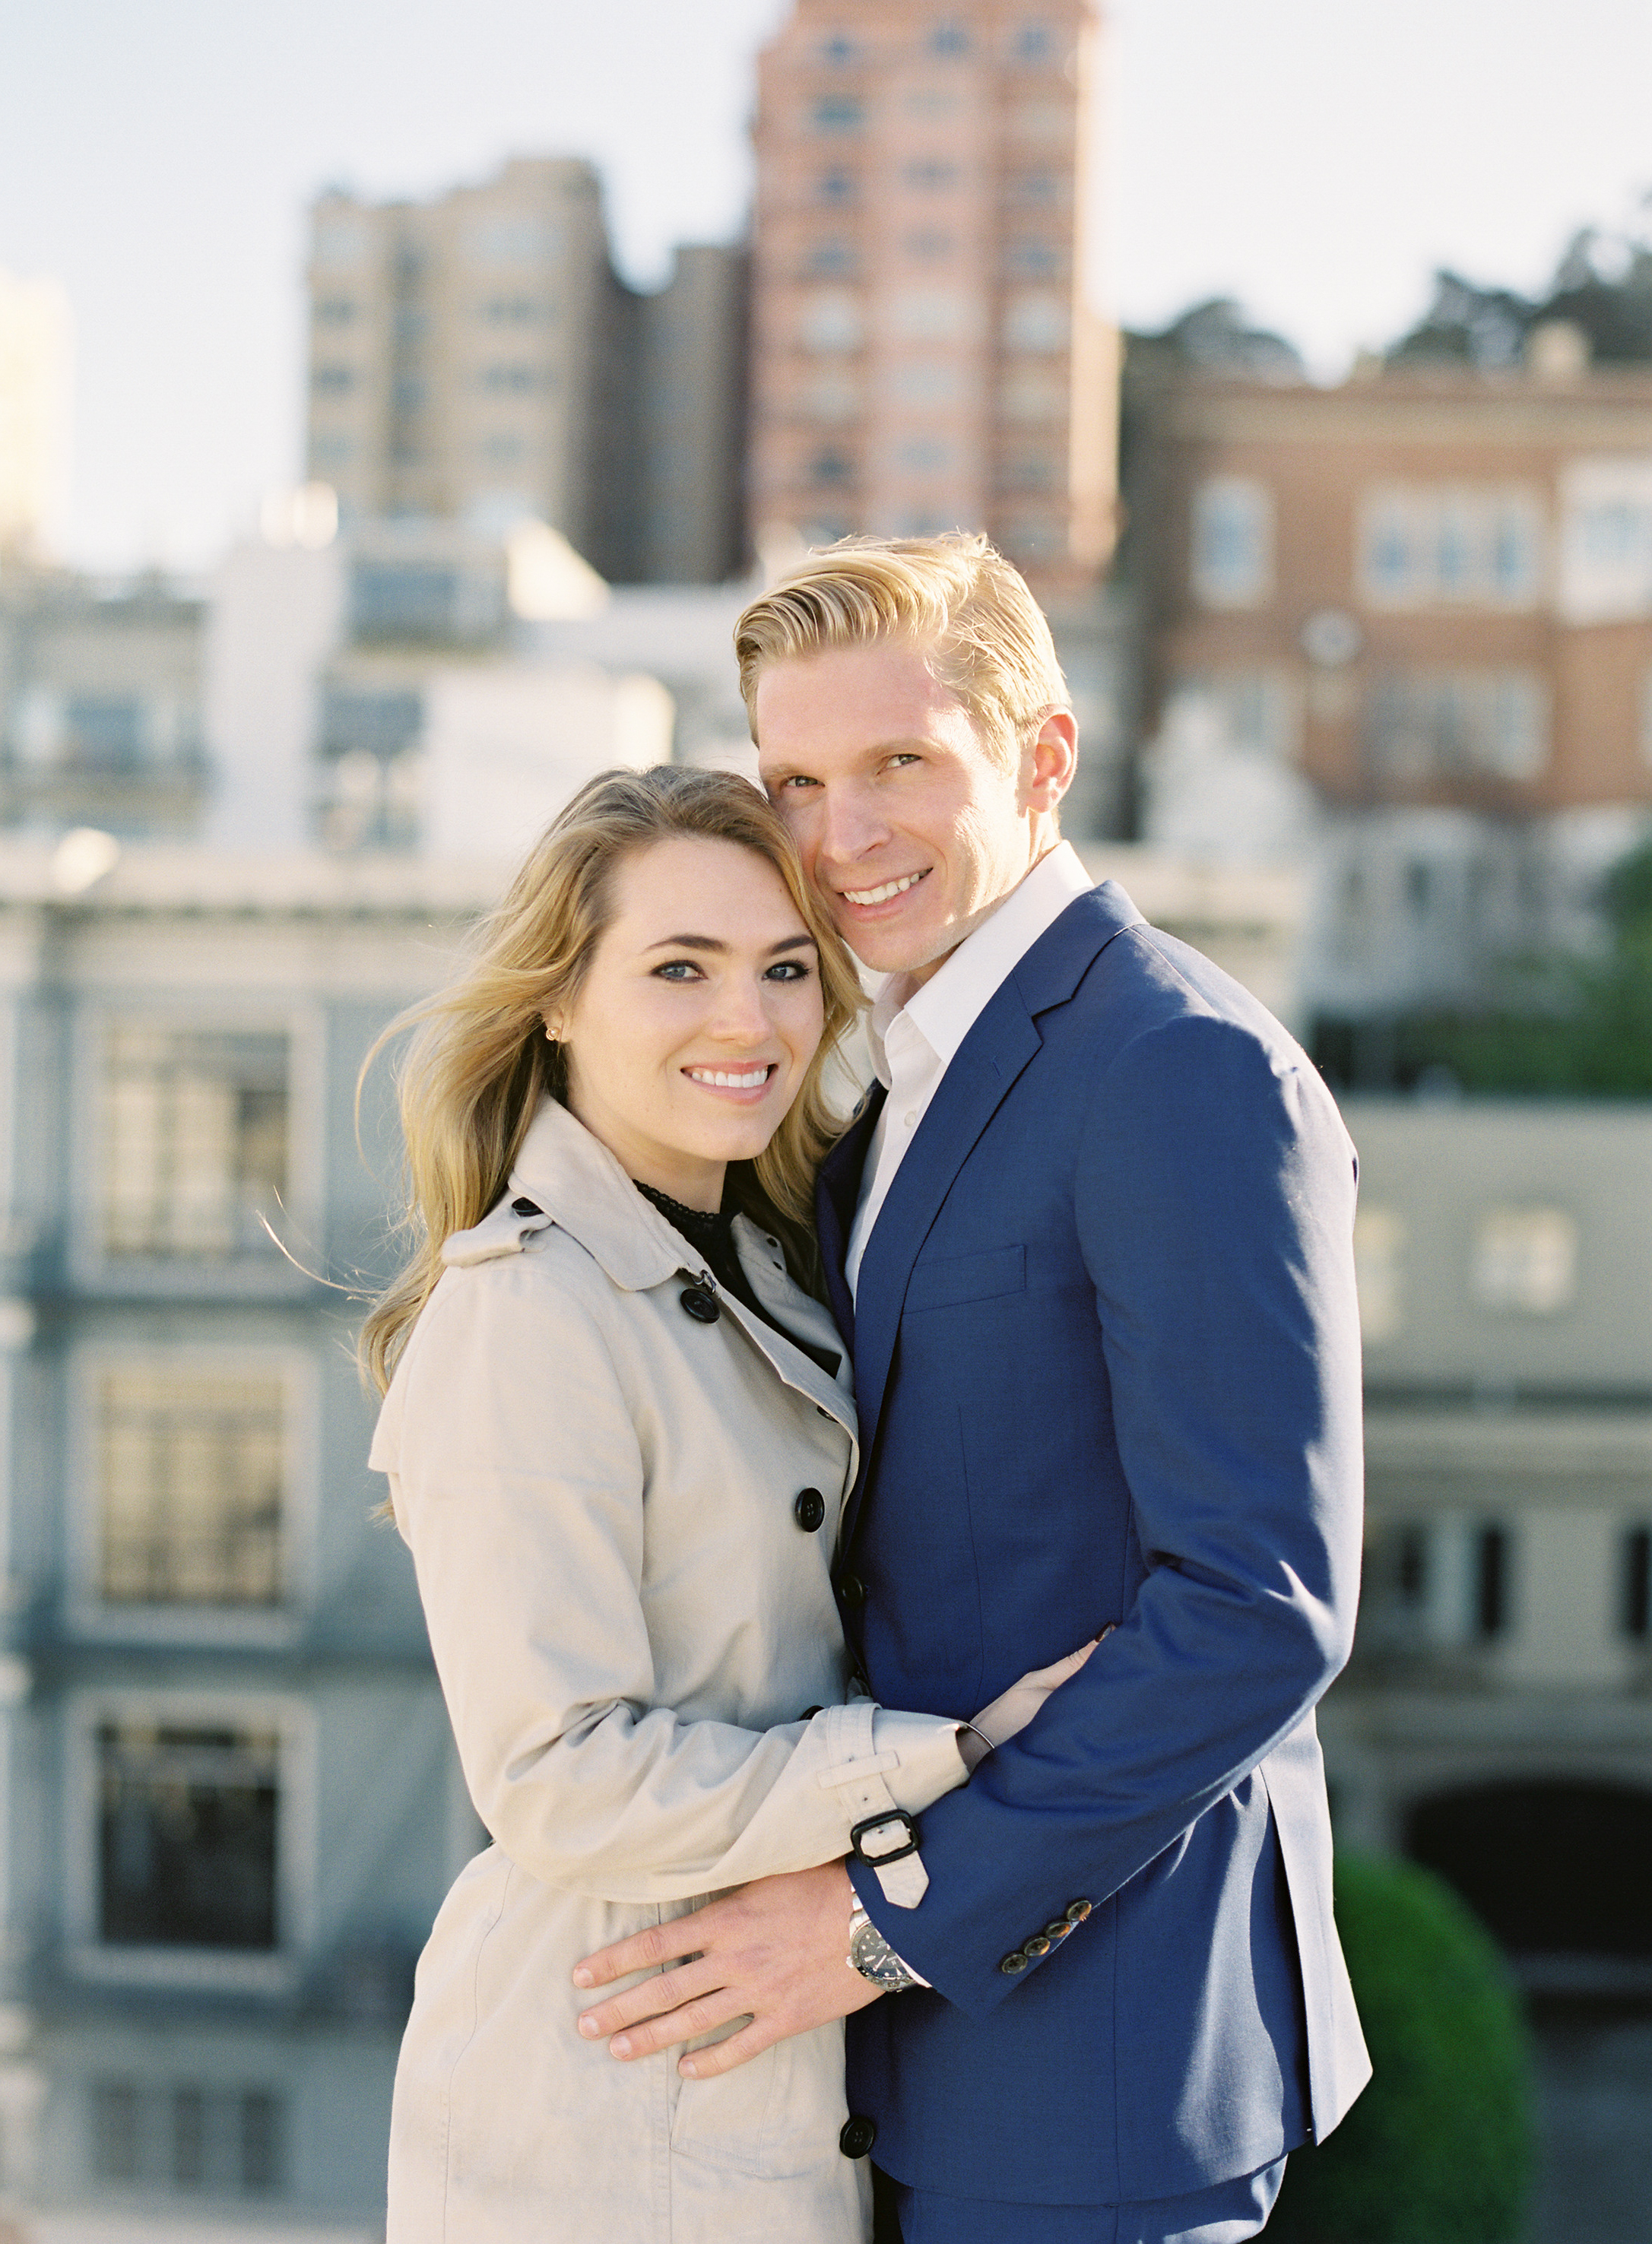 Jessica and Andrew Engagement-Carrie King Photographer-105.jpg